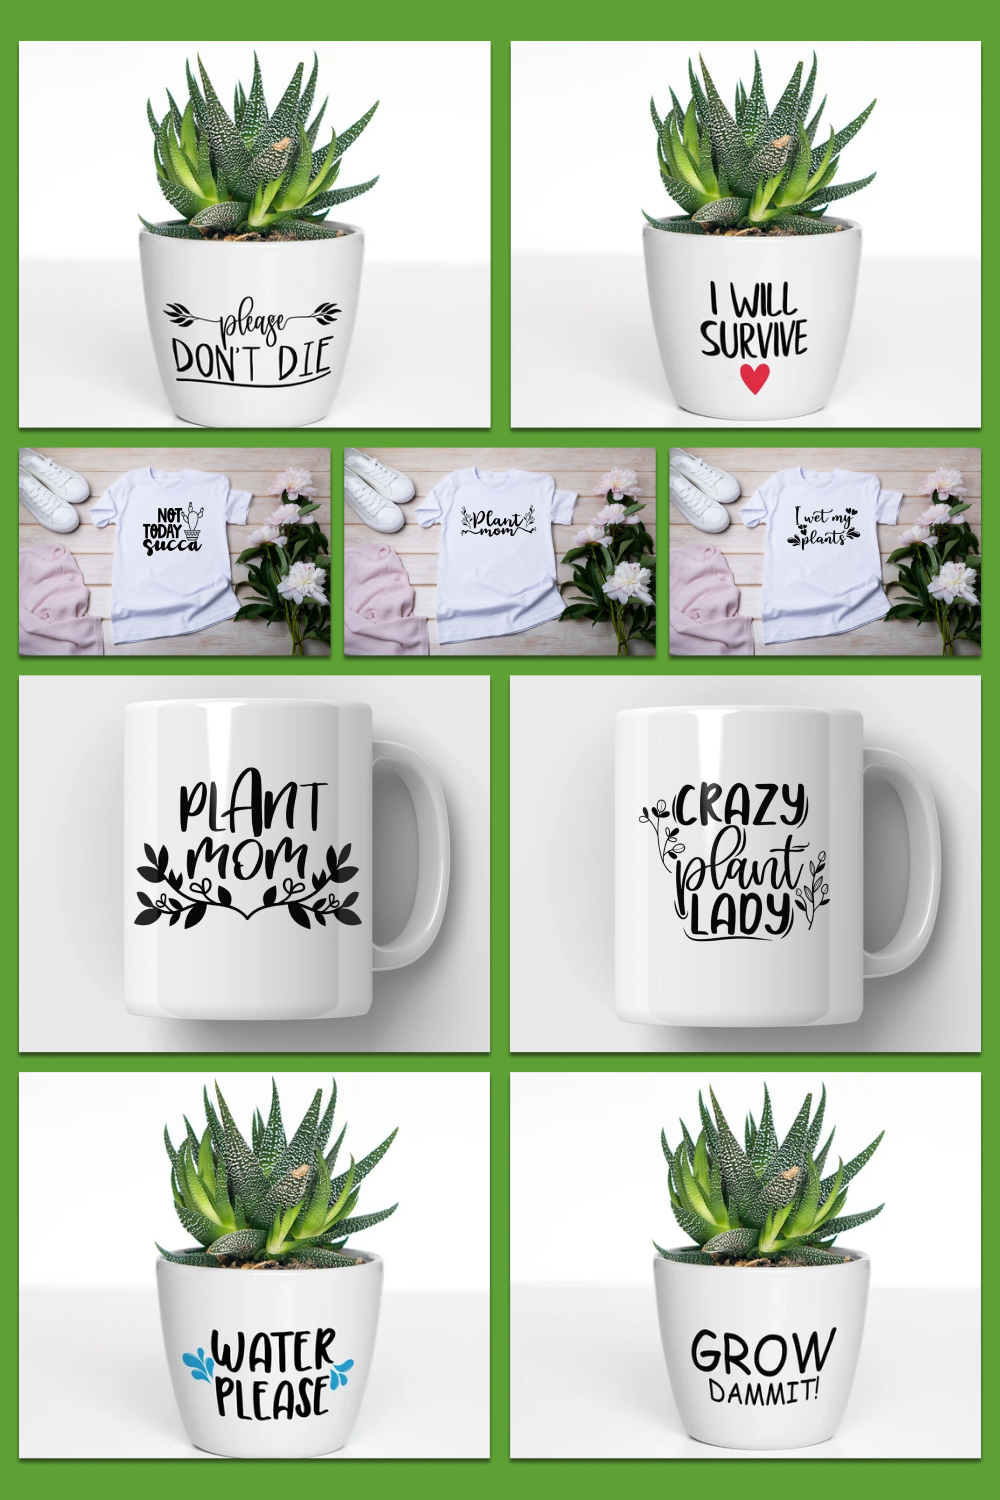 Various prints on cups and clothes.